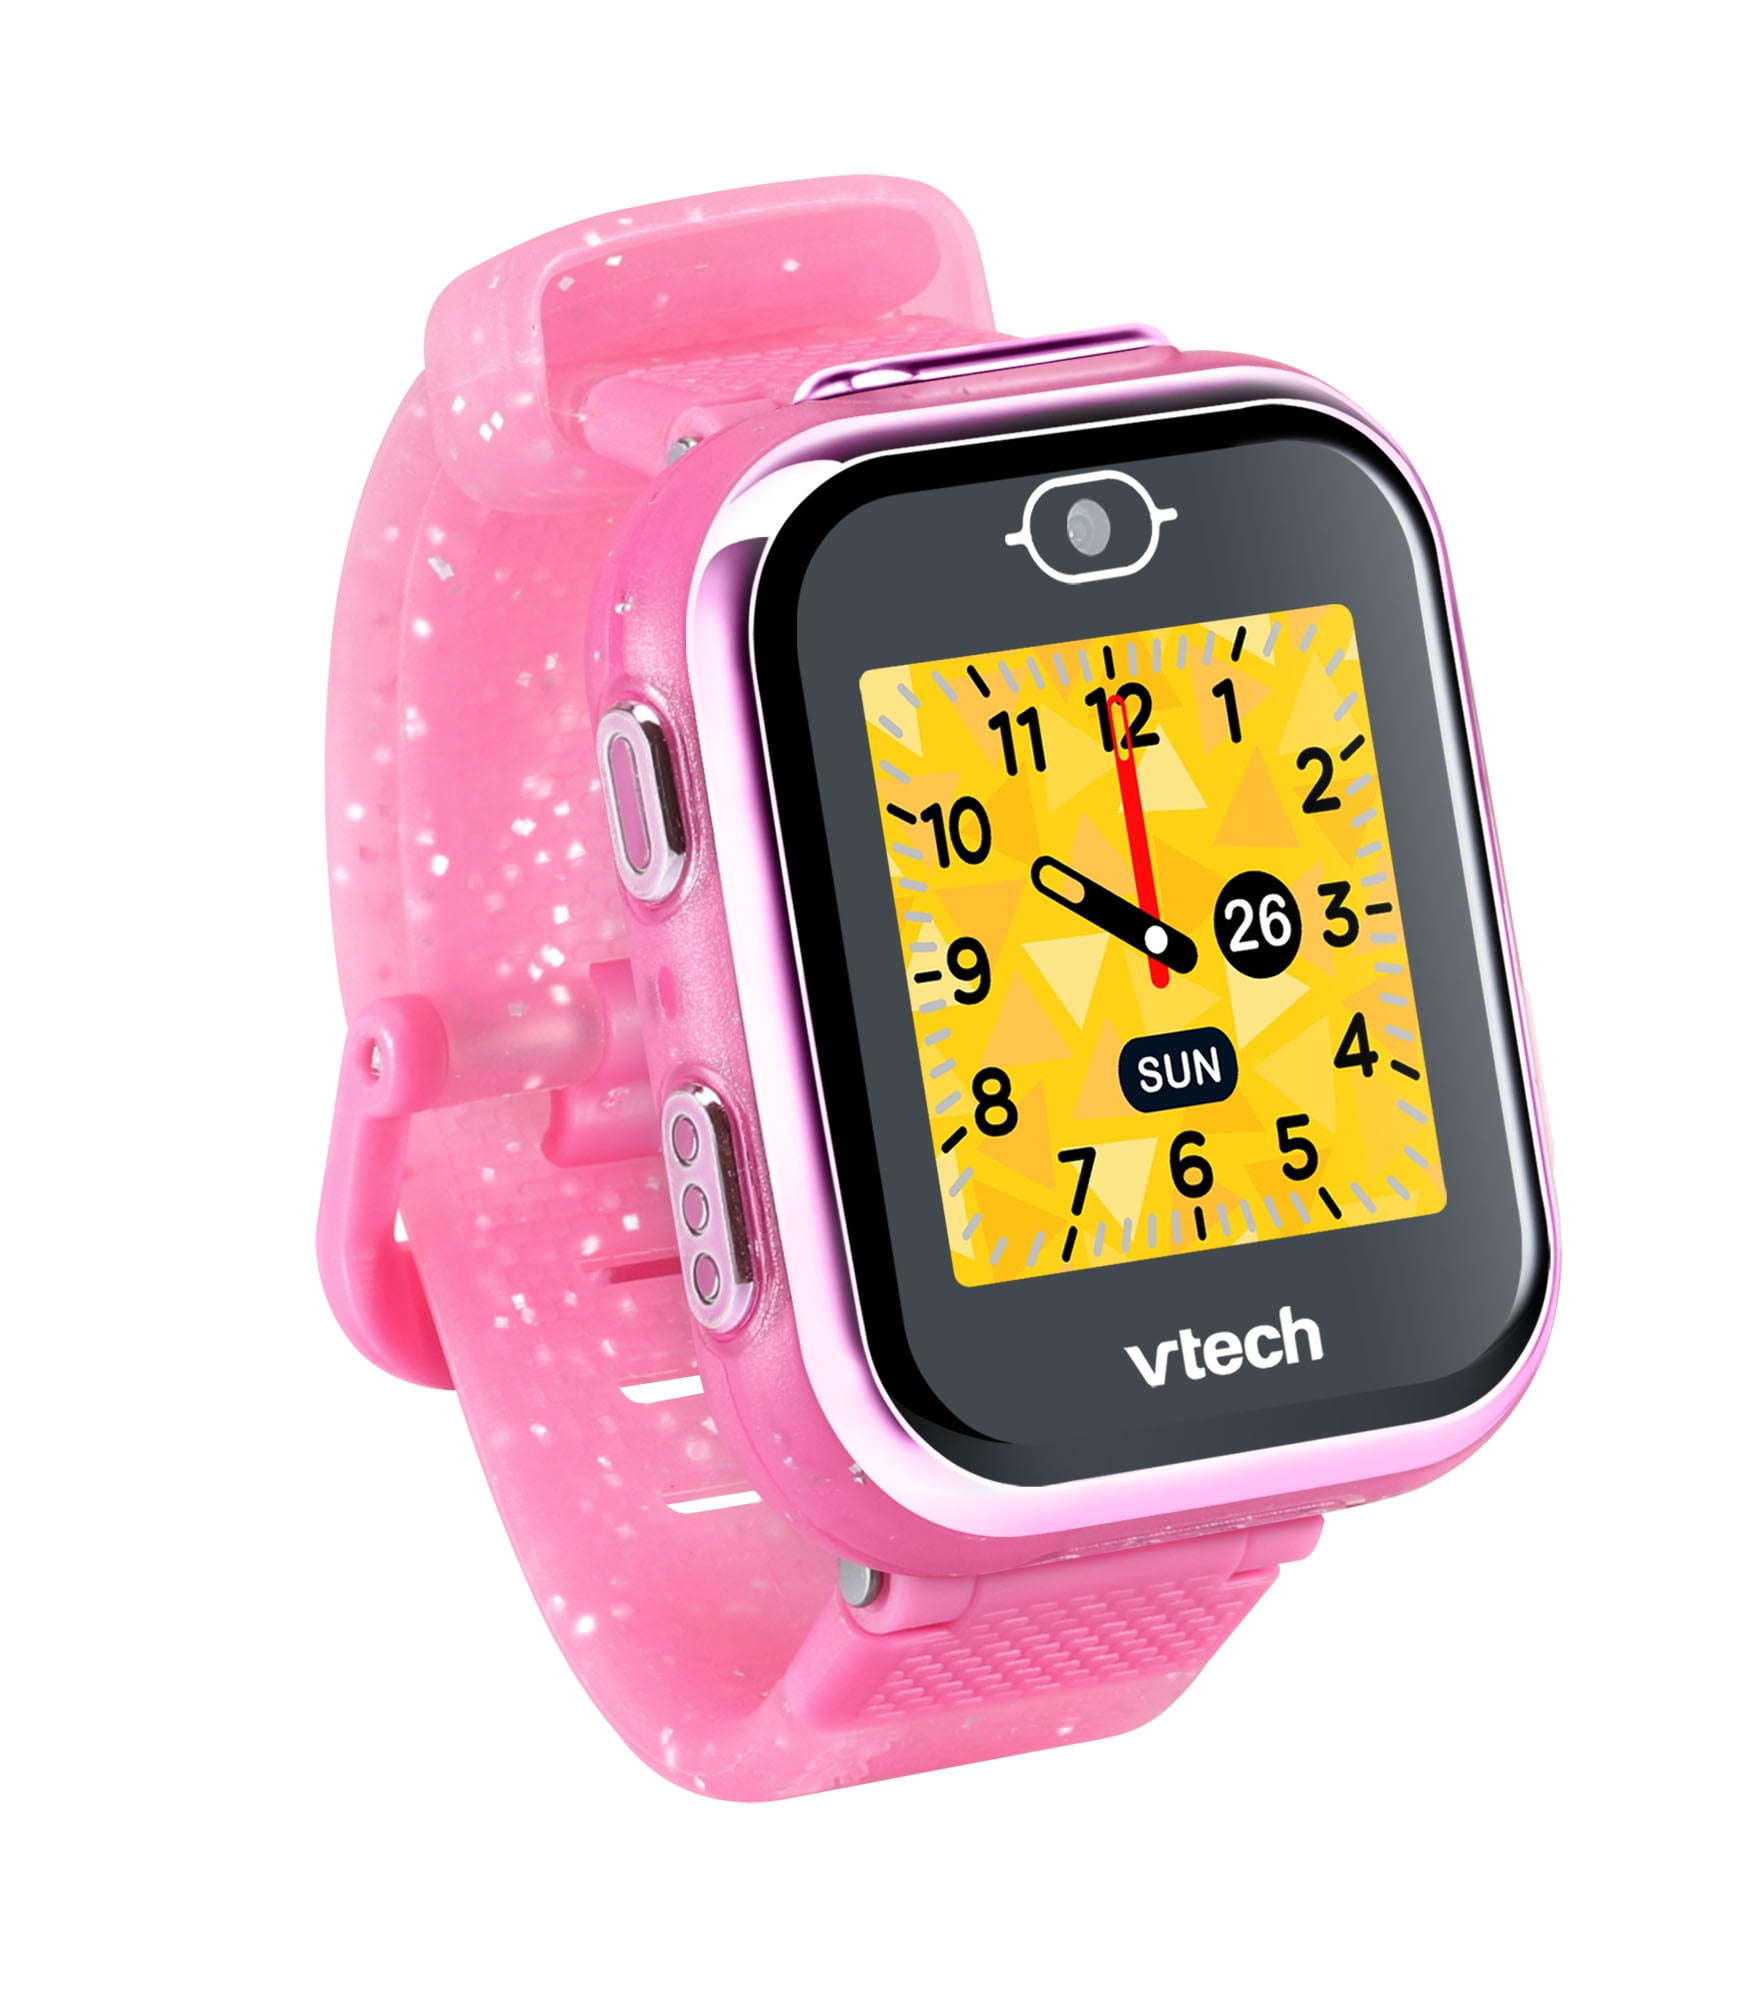 VTech Kidizoom Smartwatch DX2 Special Exclusive Red Unicorn Edition NEW IN BOX! 